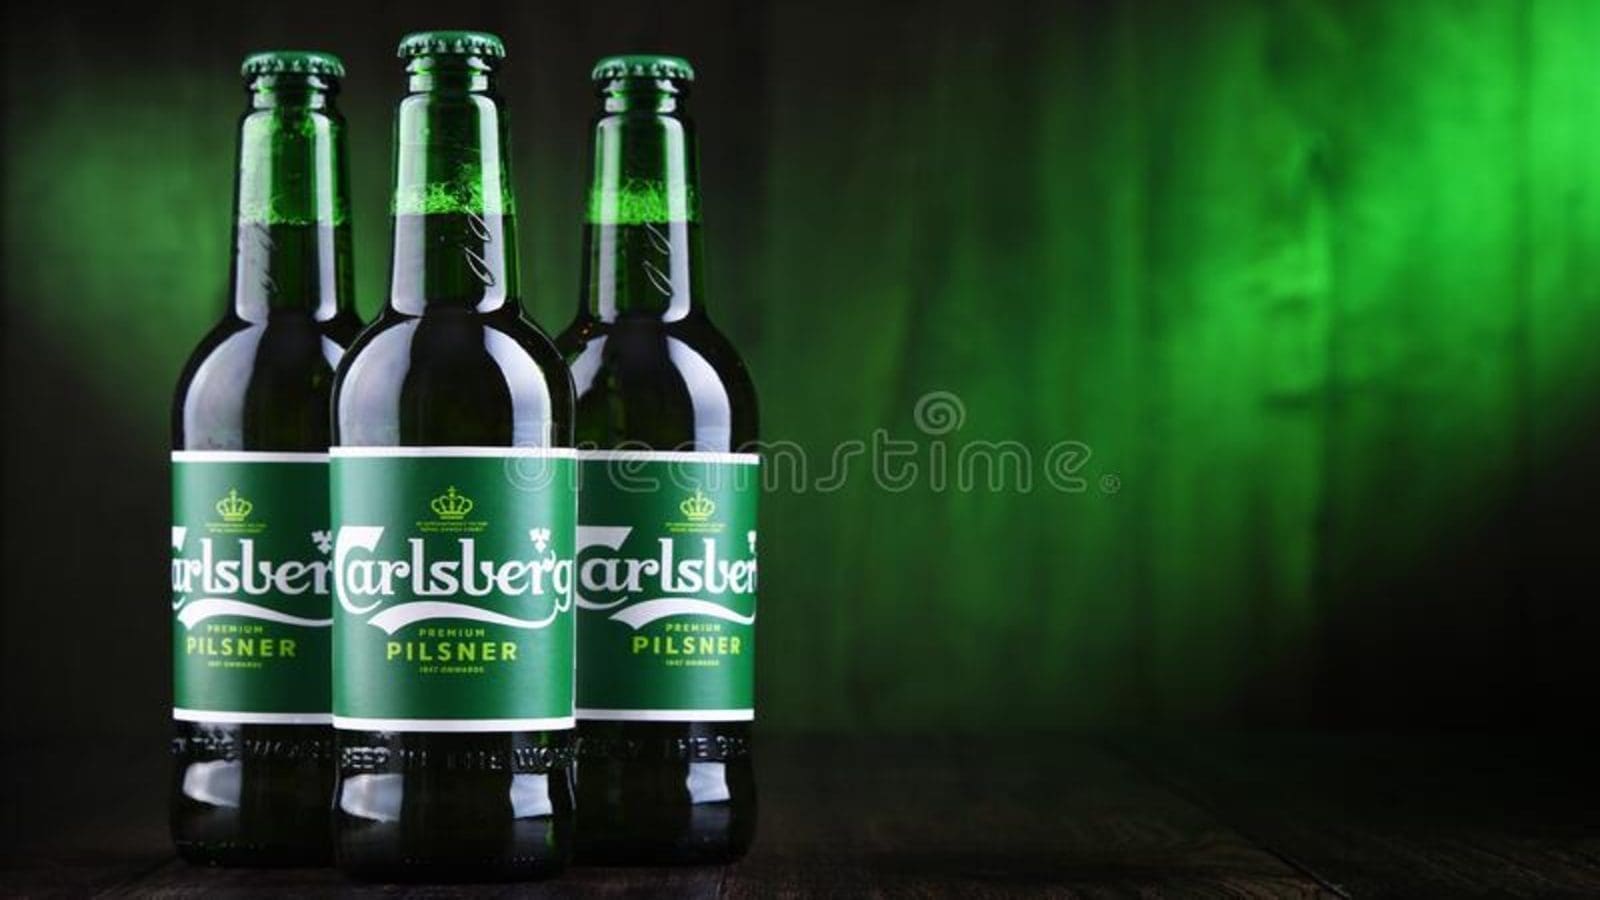 Carlsberg registers 27% rise in H1 revenue, pledges net zero carbon emission by 2040 in entire supply chain